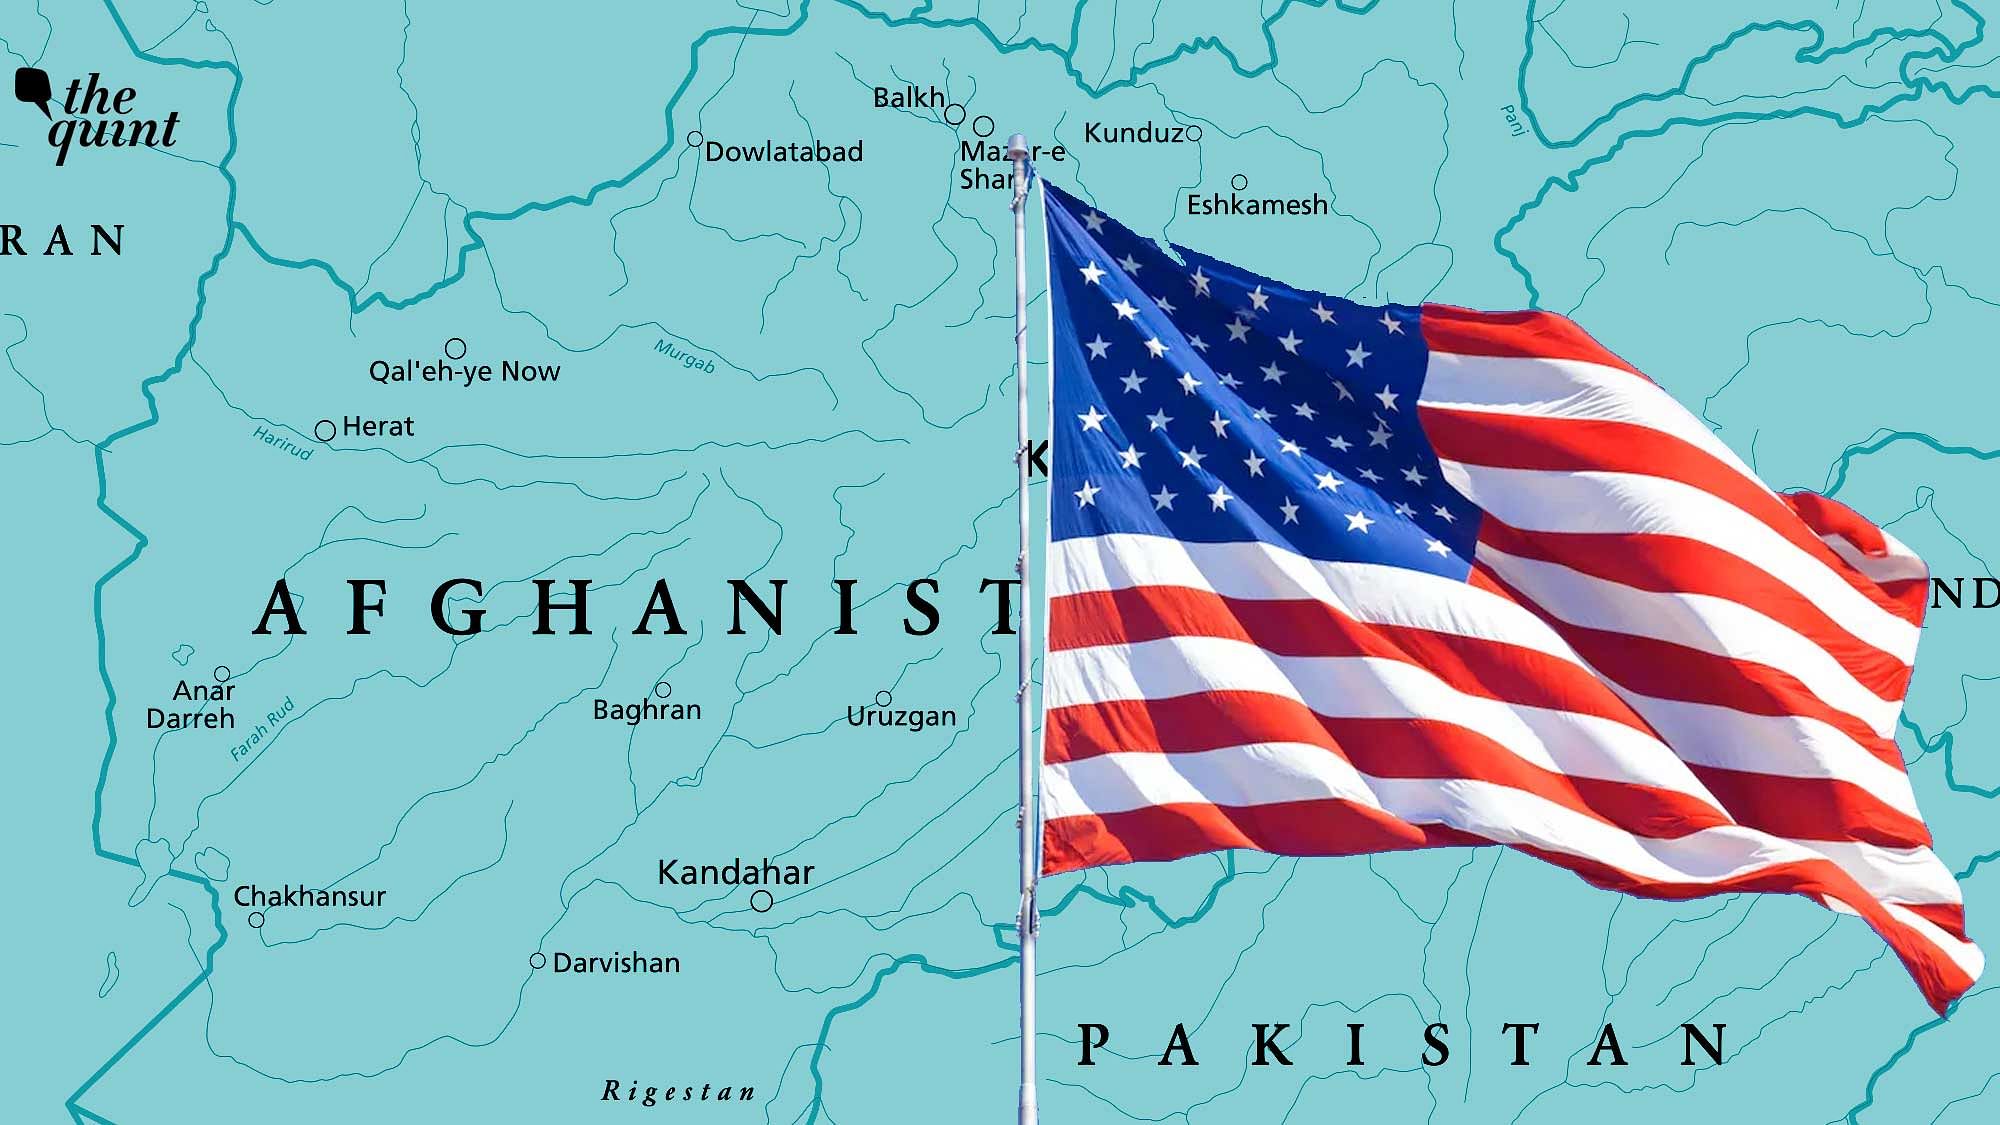 <div class="paragraphs"><p>Ahead of the <a href="https://www.thequint.com/news/world/afghanistan-may-seek-military-assistance-from-india-in-future-afghan-envoy#read-more">withdrawal of American military</a> from Afghanistan, US President Joe Biden on Friday, 25 July, vowed 'sustained partnership' to the Afghanistan government in their fight against the Taliban.</p></div>